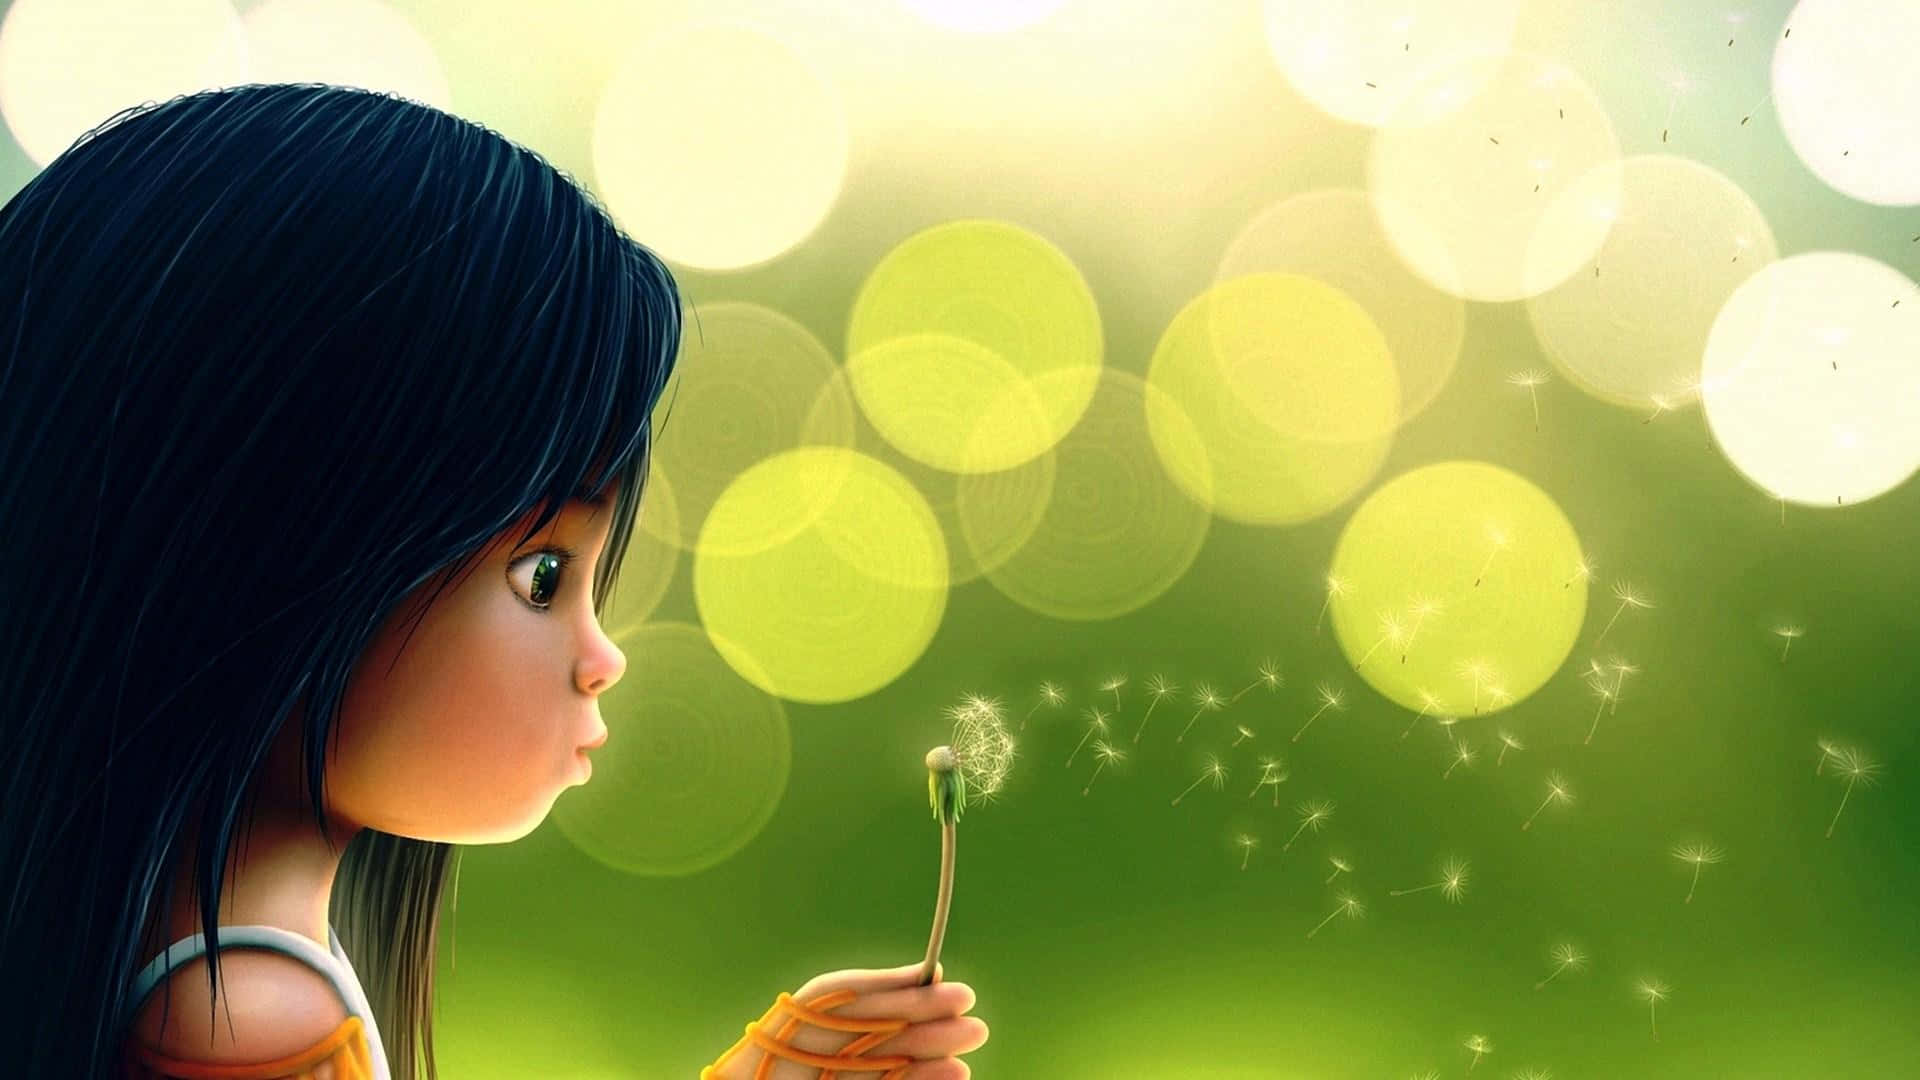 a girl blowing a dandelion in the grass